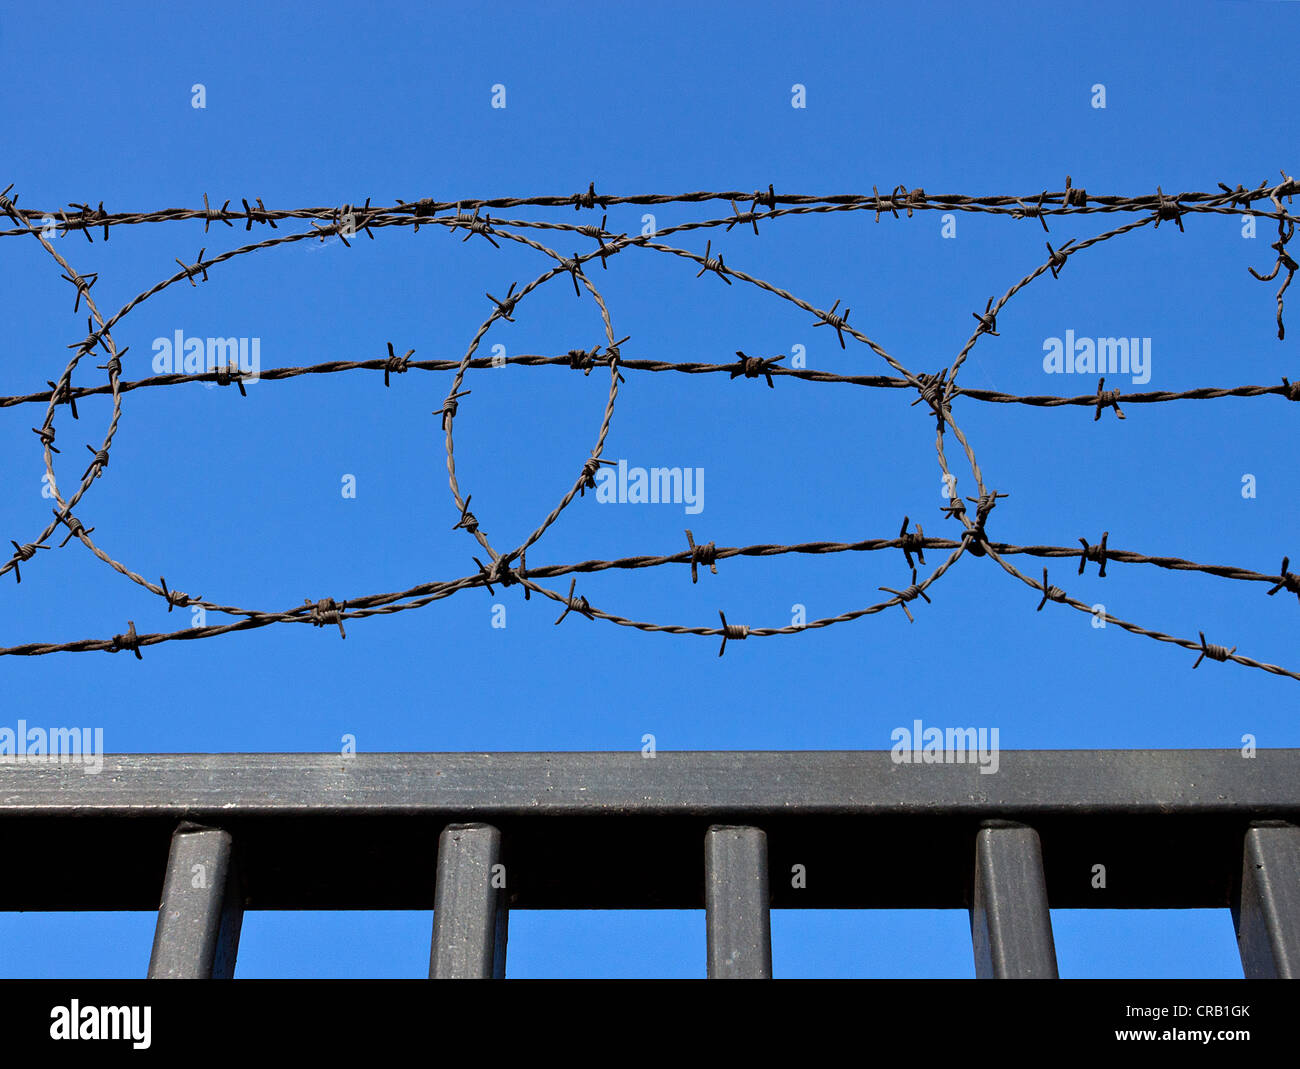 Barb barbed wire security fence fencing gate Stock Photo